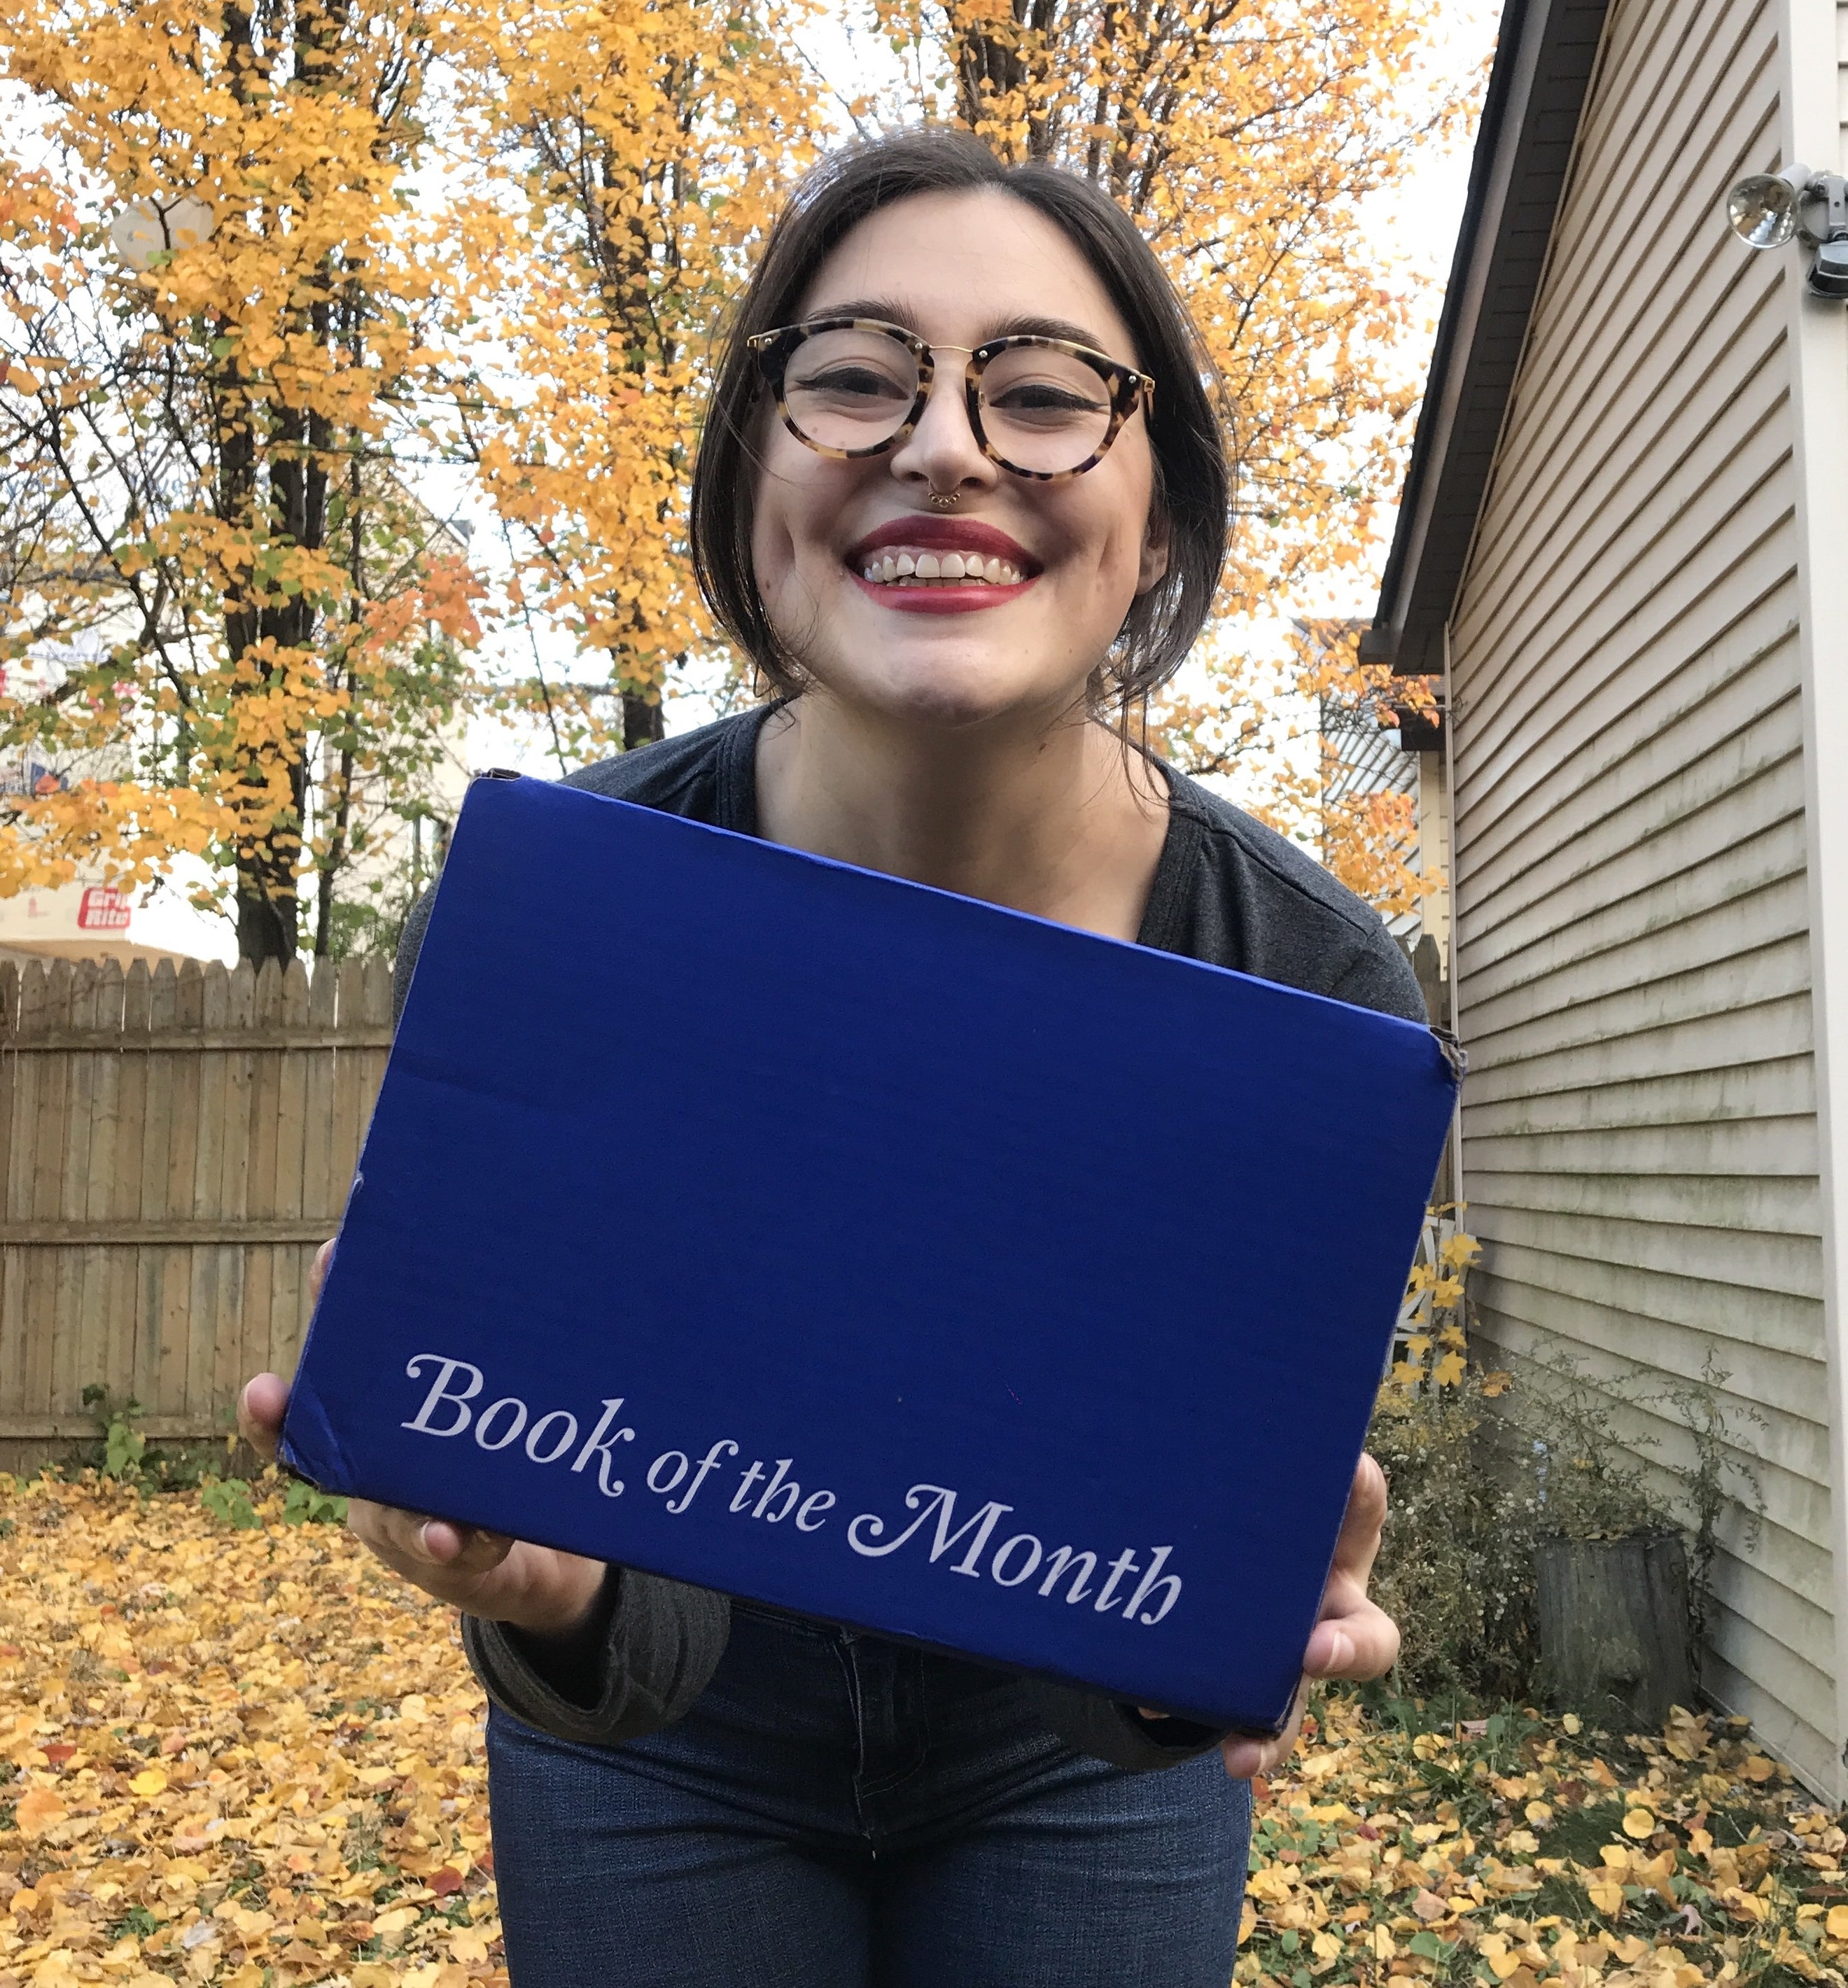 writer holding book of the month box smiling